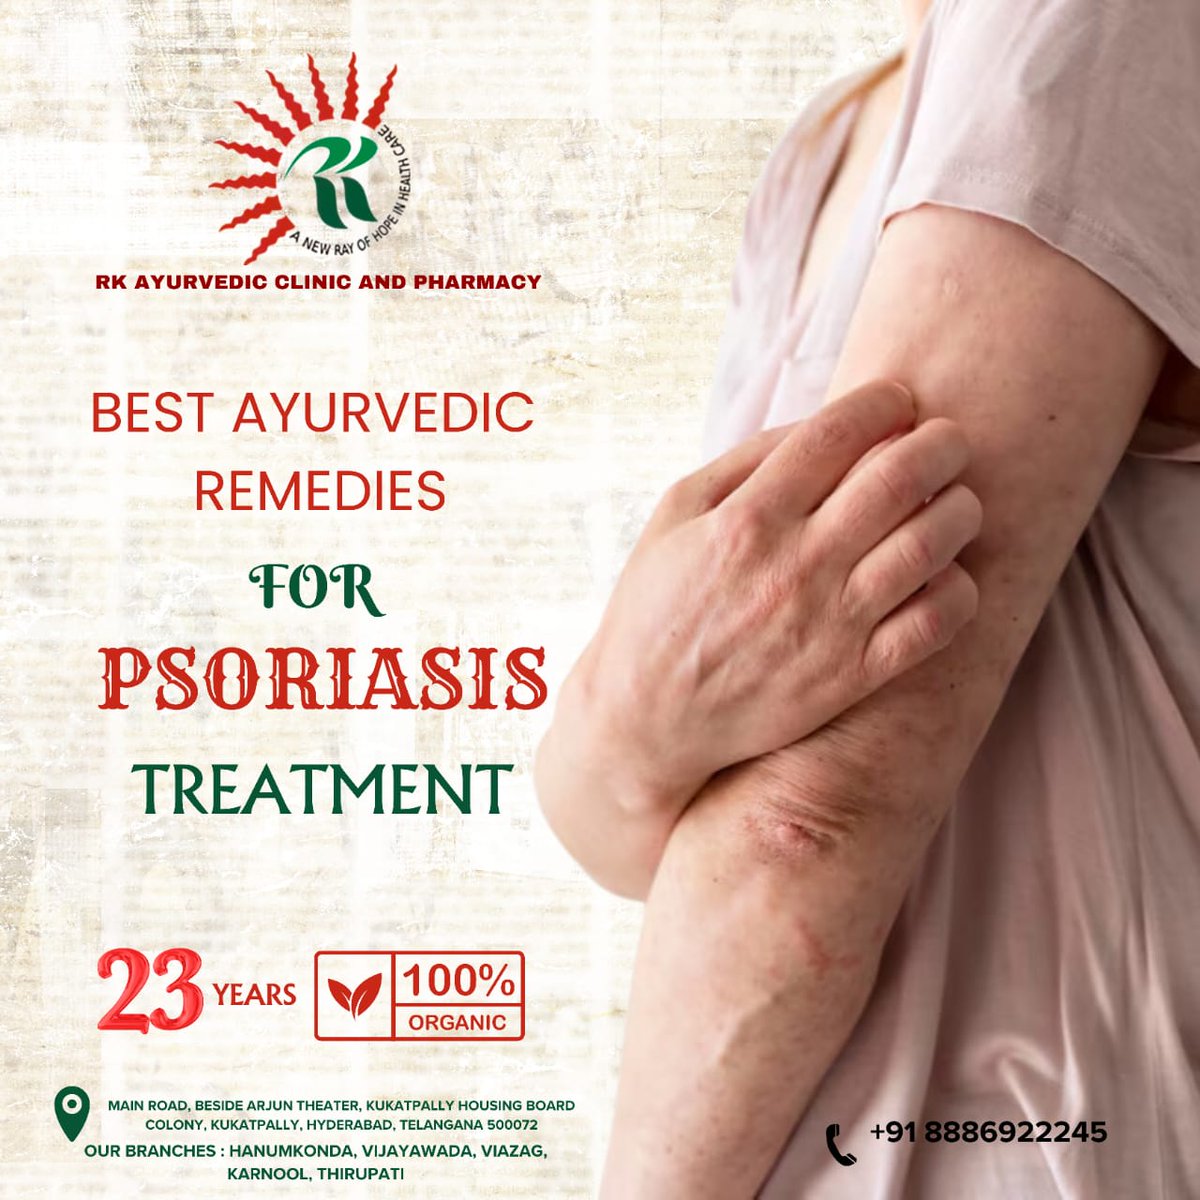 🌿Welcome to RK Ayurvedic Clinic and Pharmacy!🌟
Experience the best Ayurvedic remedies for psoriasis treatment!With 23 years of expertise, we offer 100% organic solutions for your skin health.
Say goodbye to psoriasis struggles and  Visit us today!
#RKAyurvedicClinicAndPharmacy